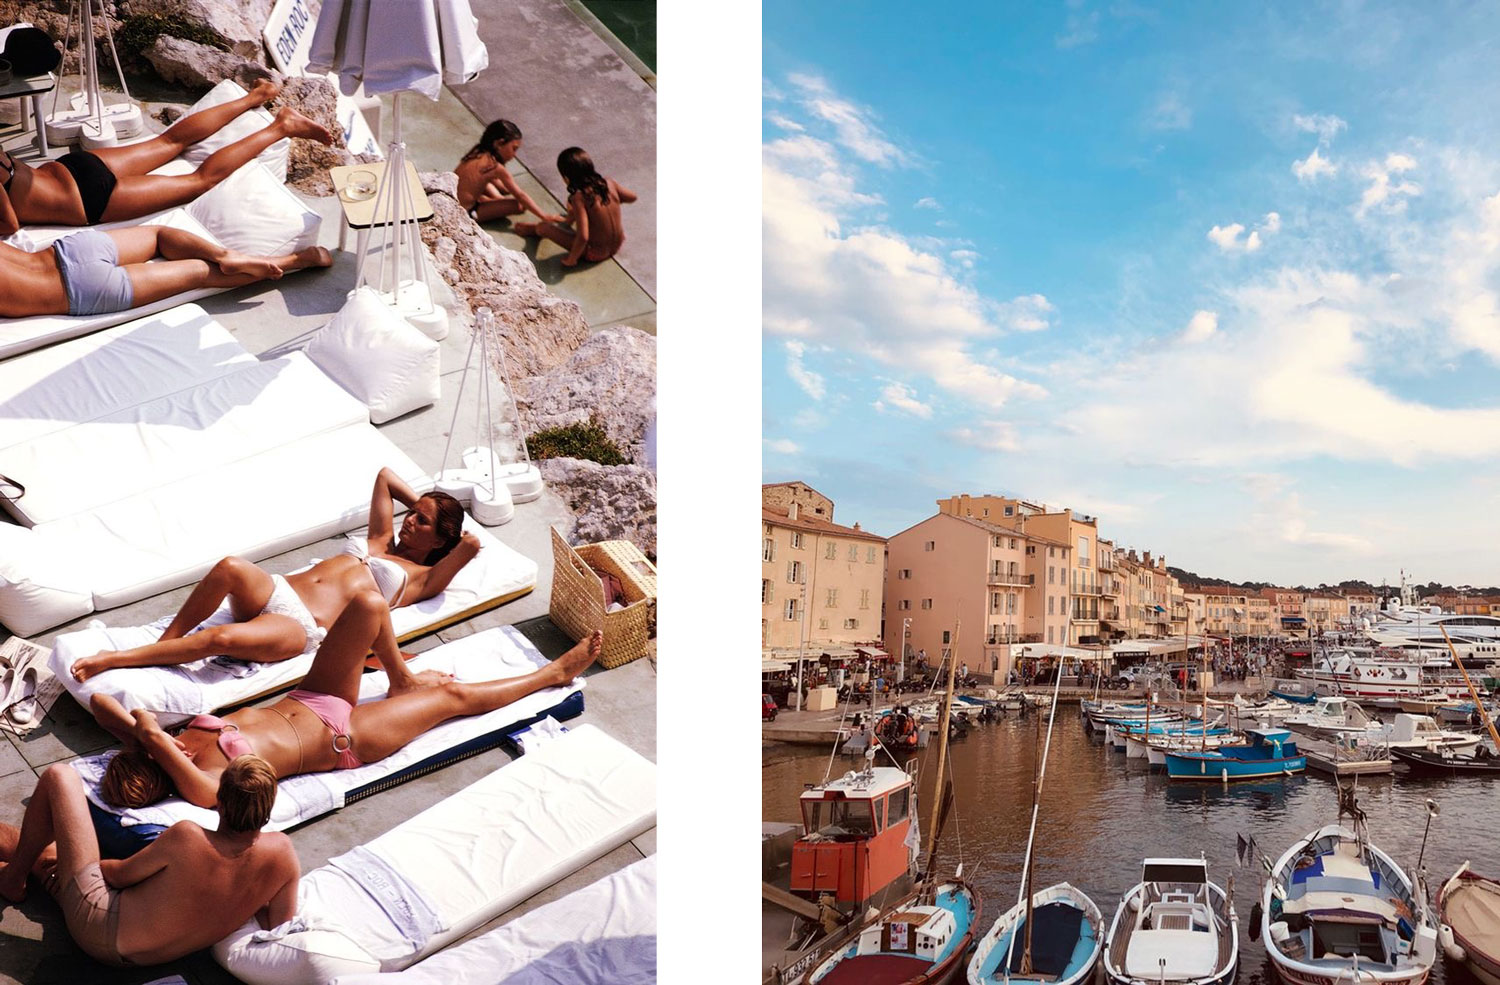 A typical scene in the French Riviera. Right: the infamous marina in St Tropez.